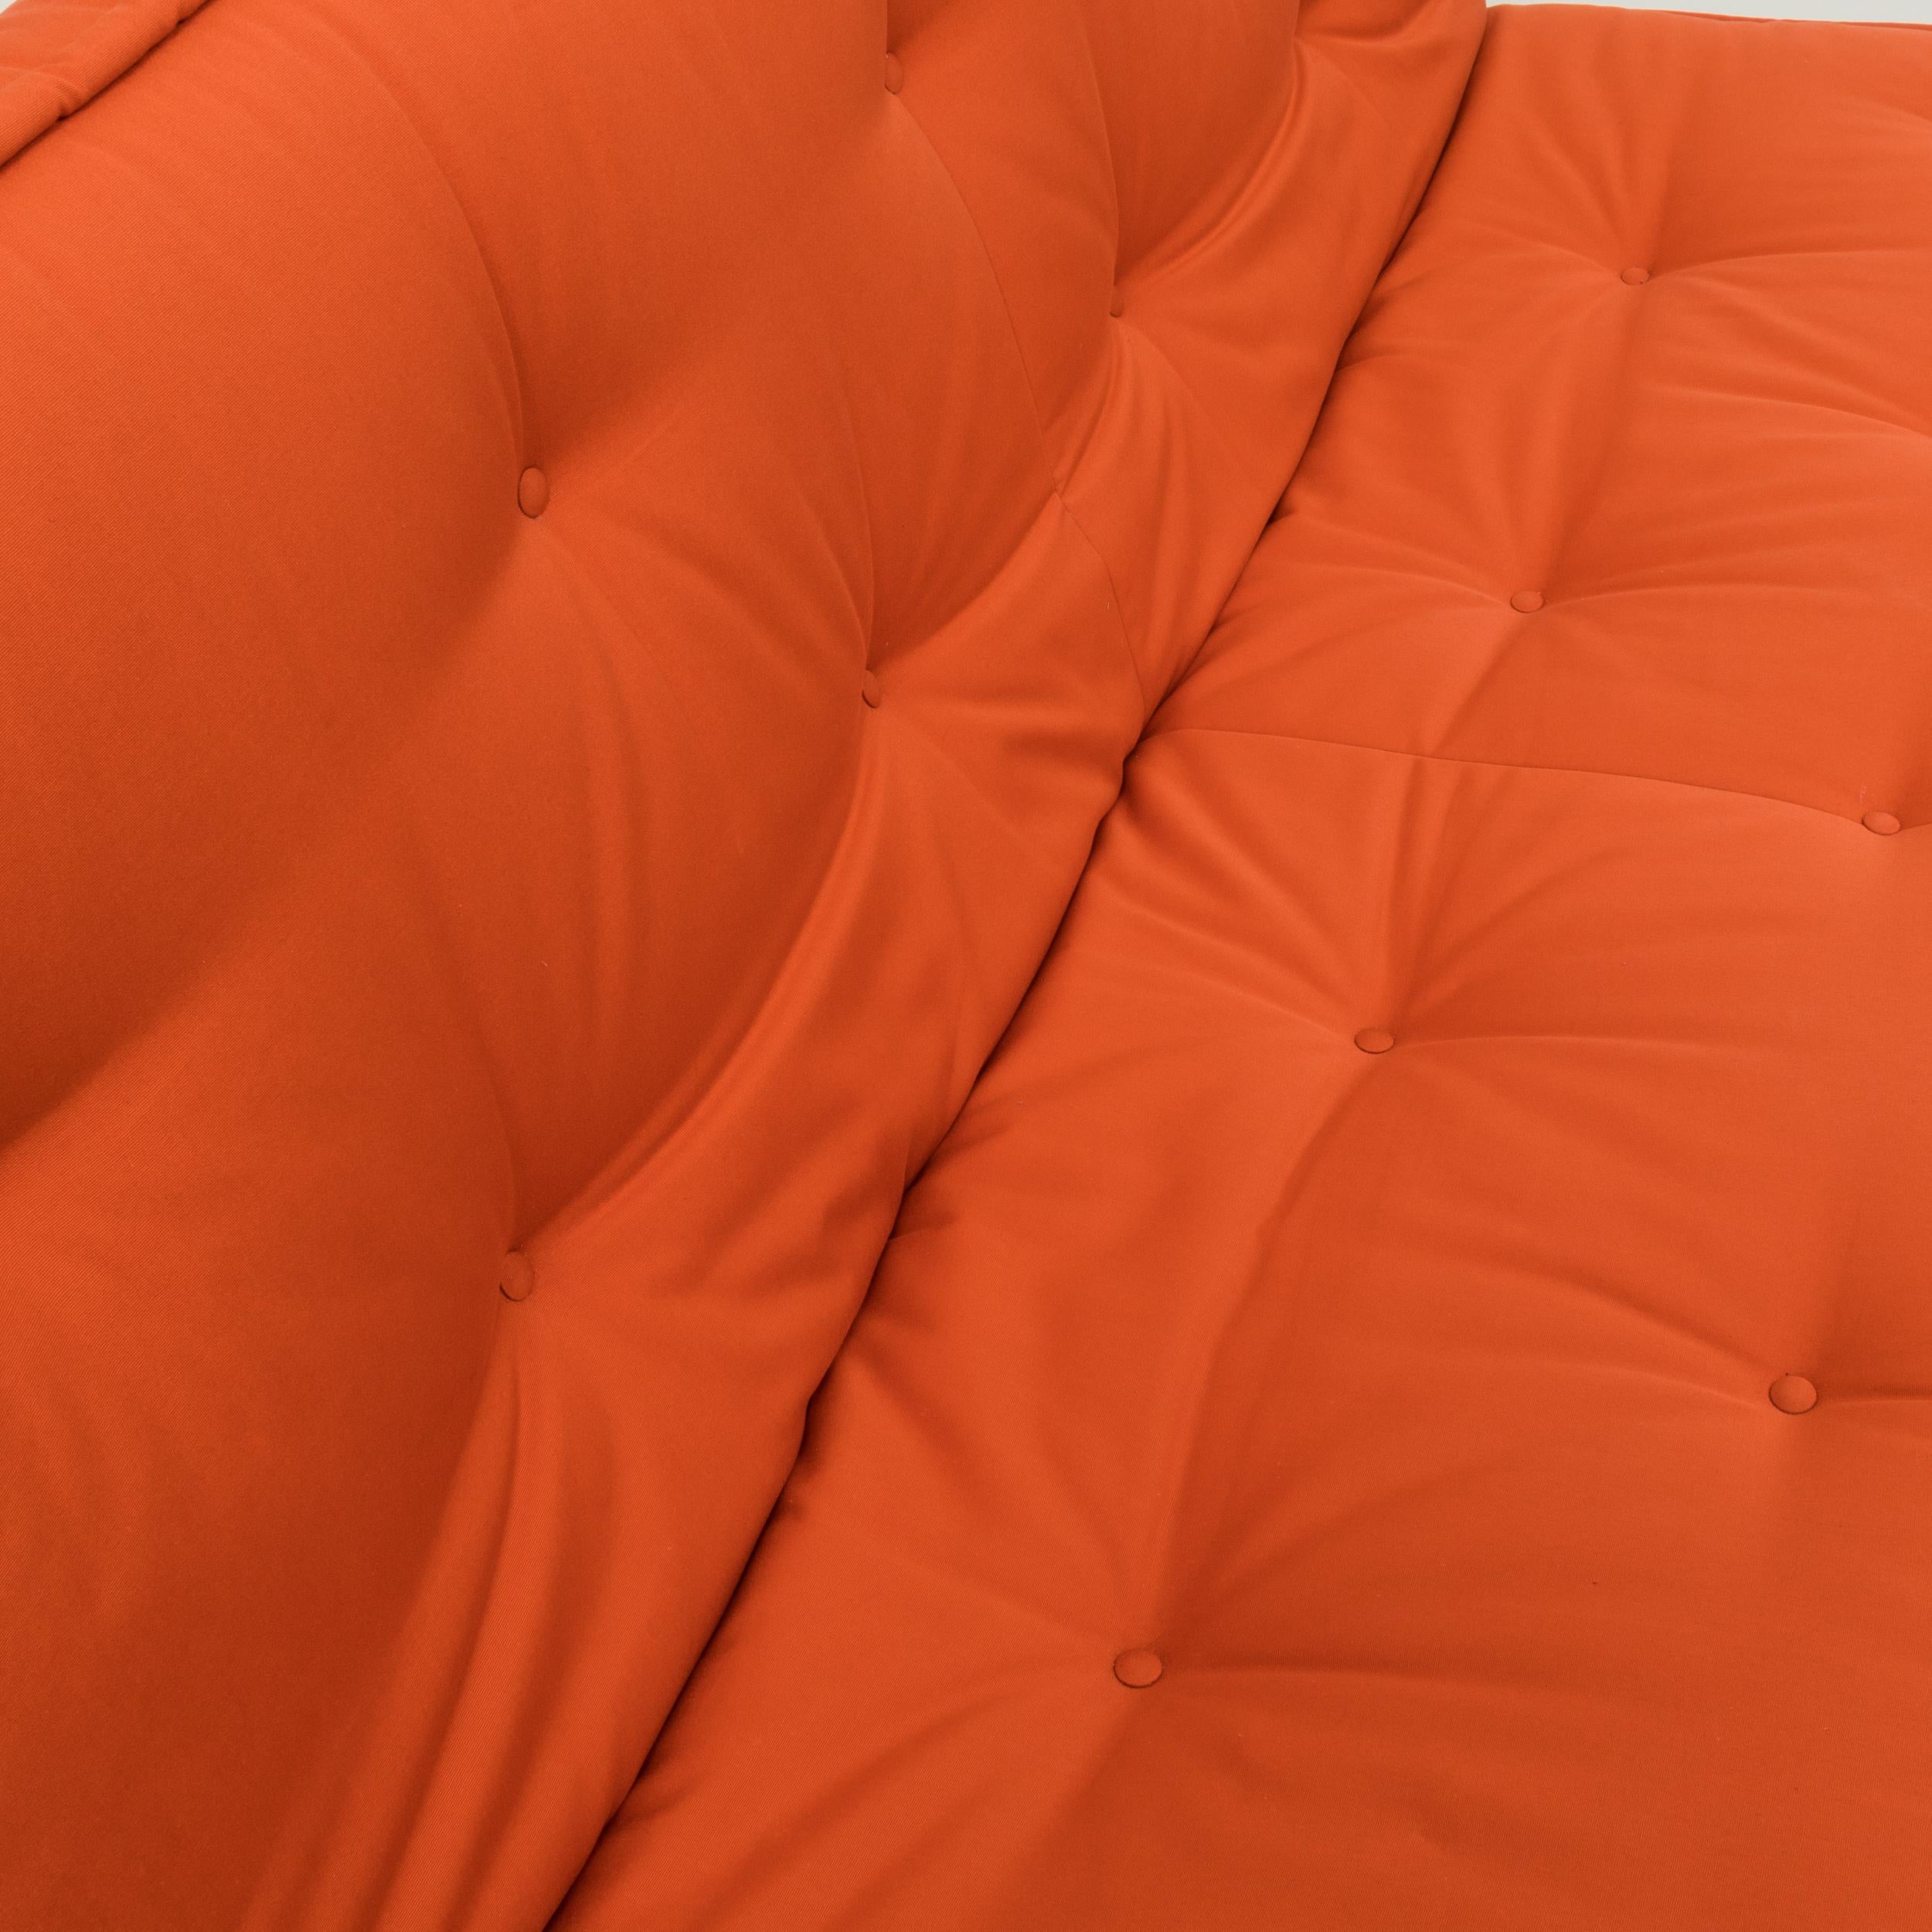 Nomade Express Red Sofa Bed by Didier Gomez for Linge Roset 1